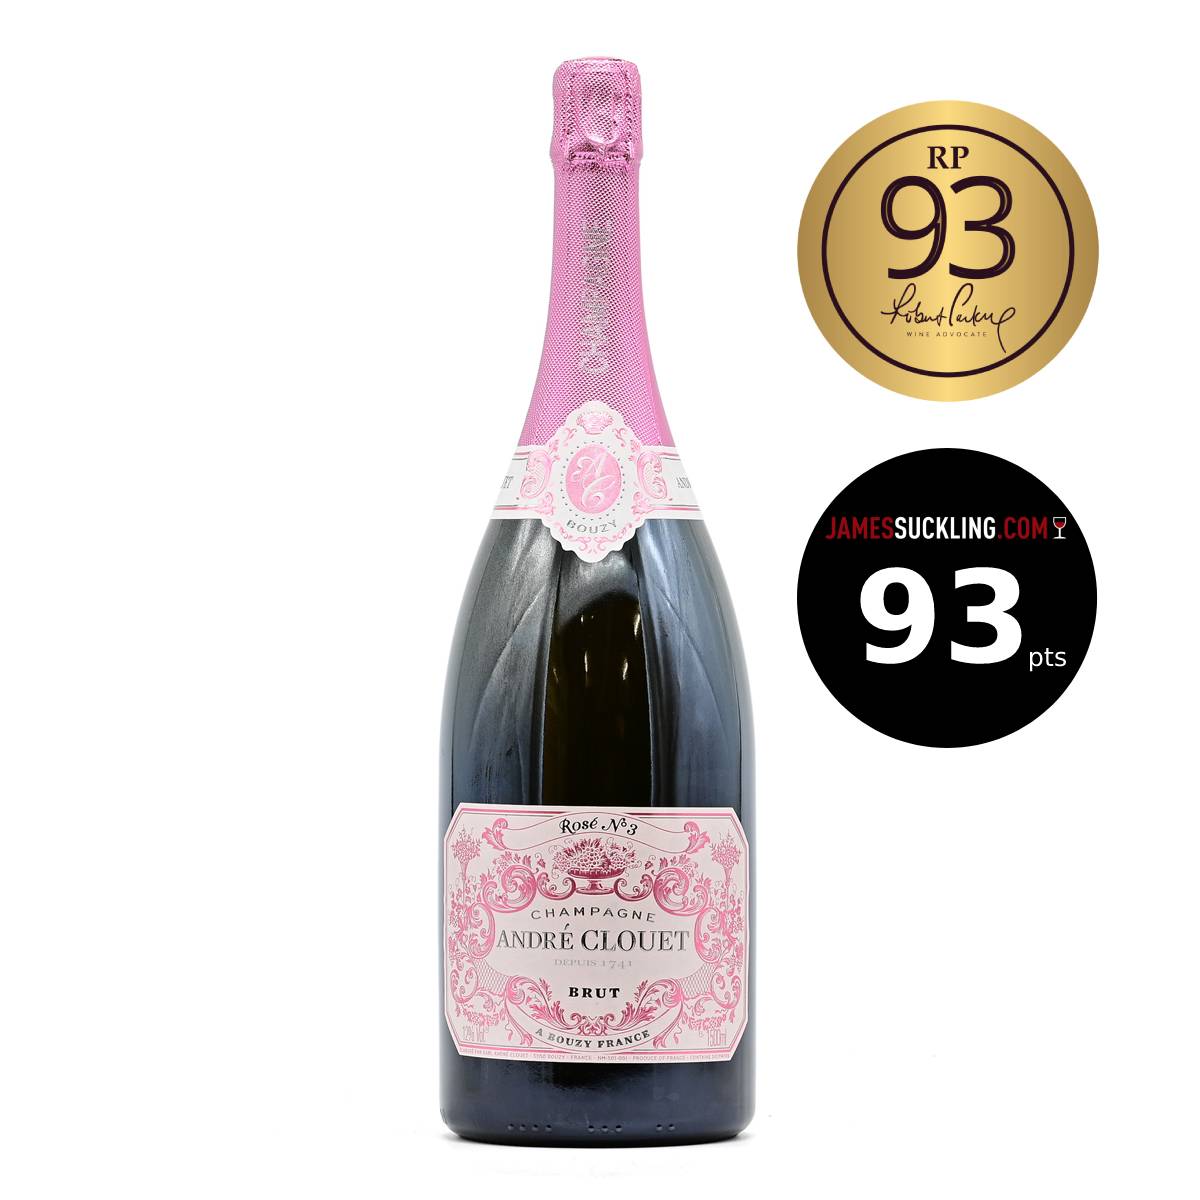 Champagne Andre Clouet Brut Rose Number 3 in imperial bottle, 6 litre French champagne, made from Pinot Noir; from Bouzy, France brought to you by GDV Fine Wines, Hong Kong